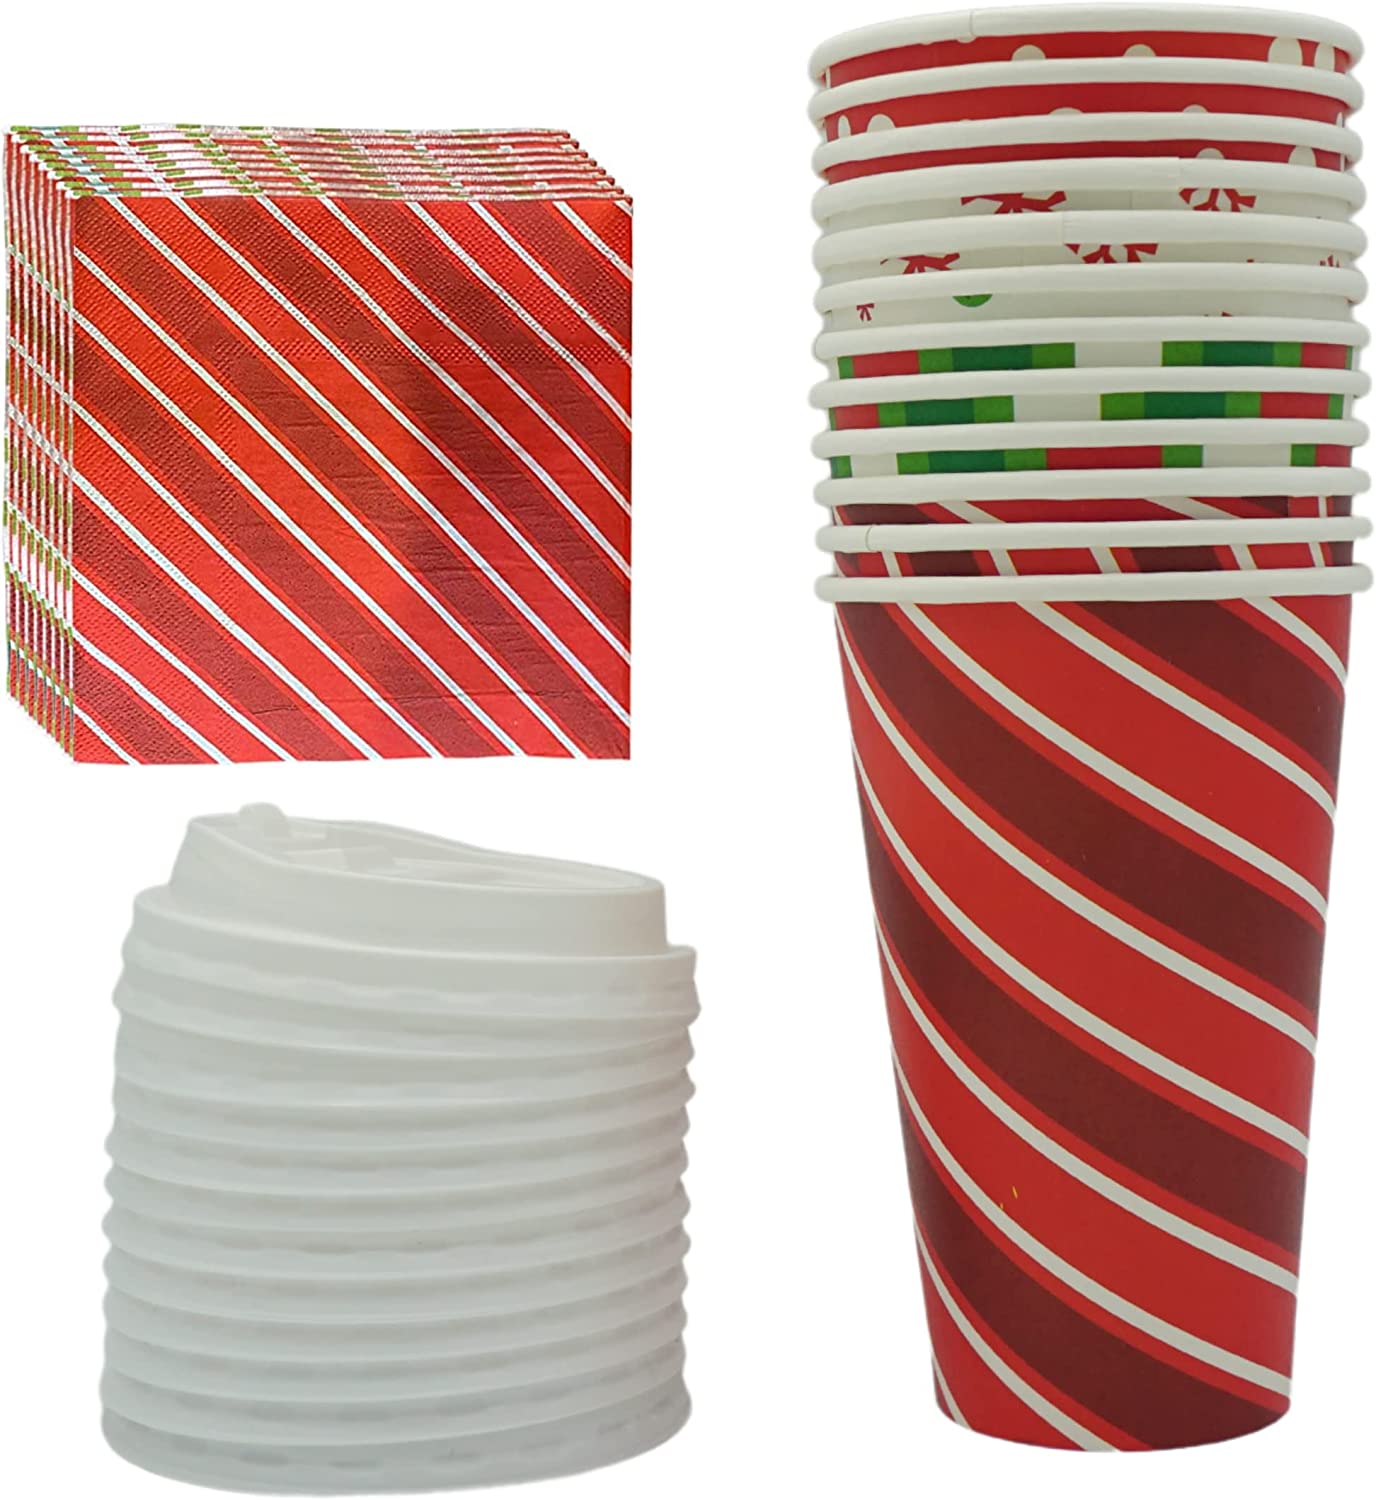 4E's Novelty Christmas Paper Cups Disposable 16 oz With Lids & Napkins (12 Packs) for Christmas Hot Cocoa Party Supplies, Hot Chocolate Bar